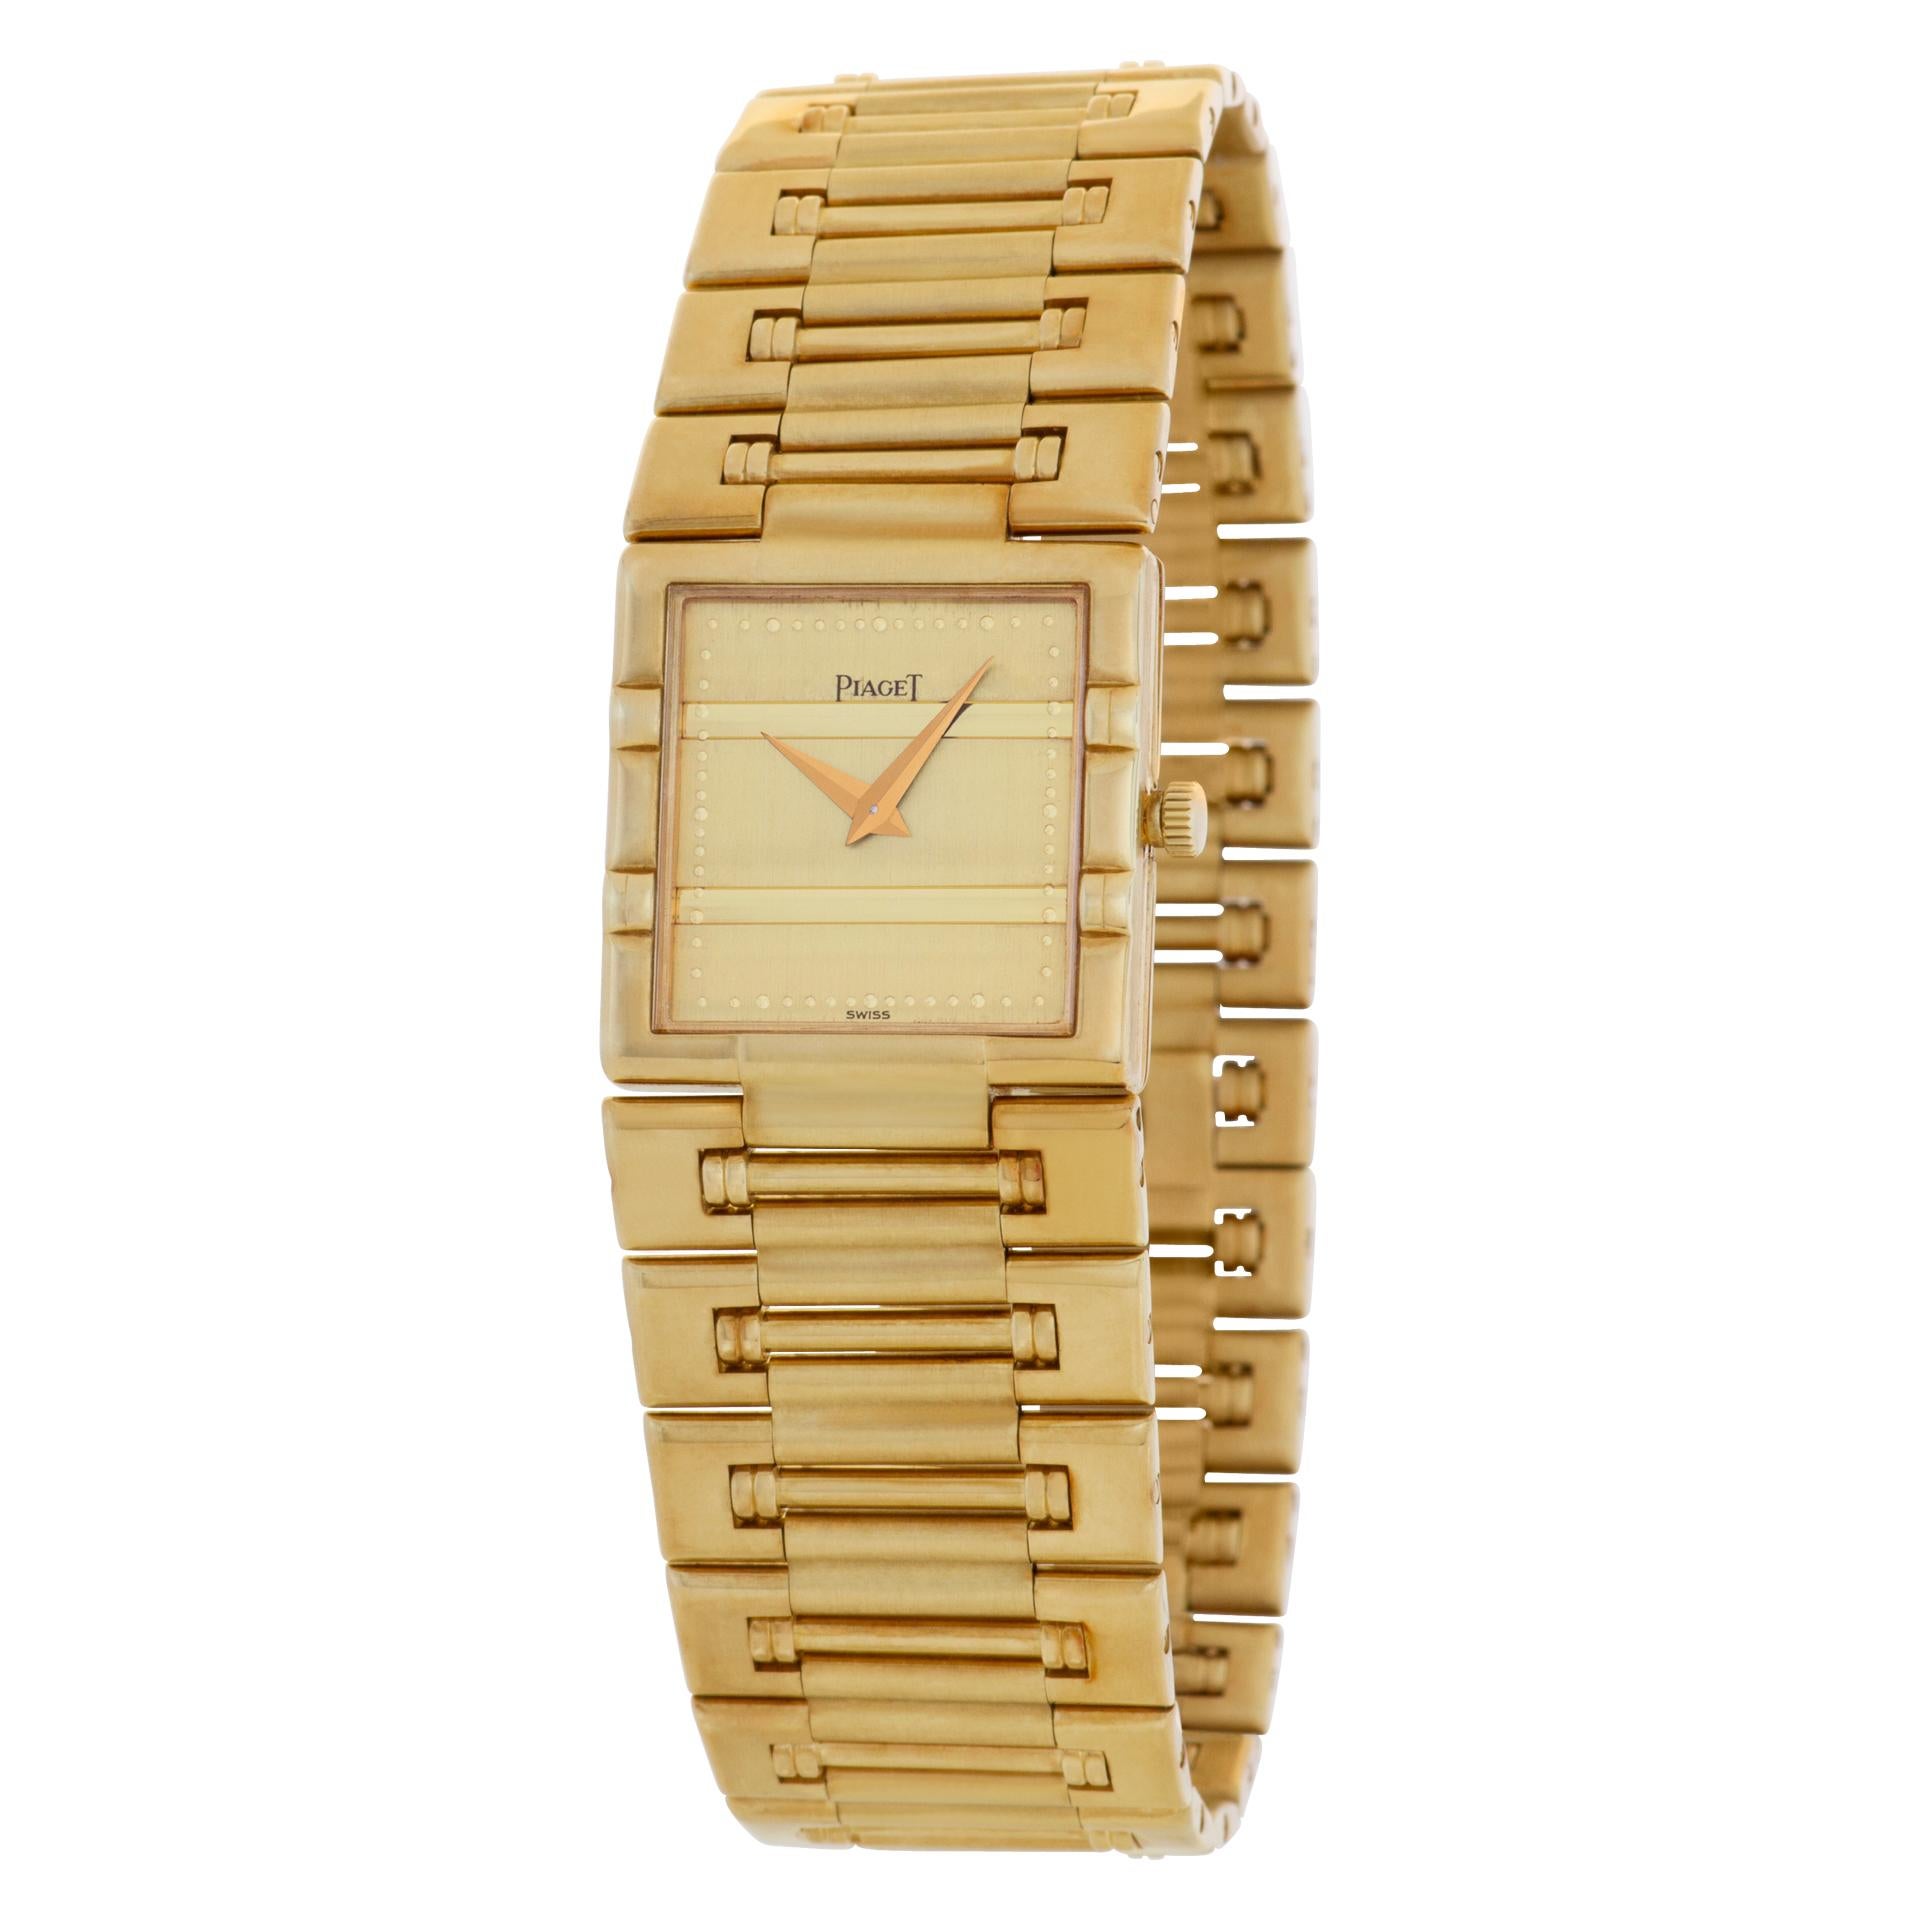 Piaget Dancer in 18k. Quartz. 23 mm case size. Ref 80317K81. Circa 1990's Fine Pre-owned Piaget Watch. Certified preowned Classic Piaget Dancer 80317K81 watch is made out of yellow gold on a 18k bracelet with a 18k Clasp buckle. This Piaget watch